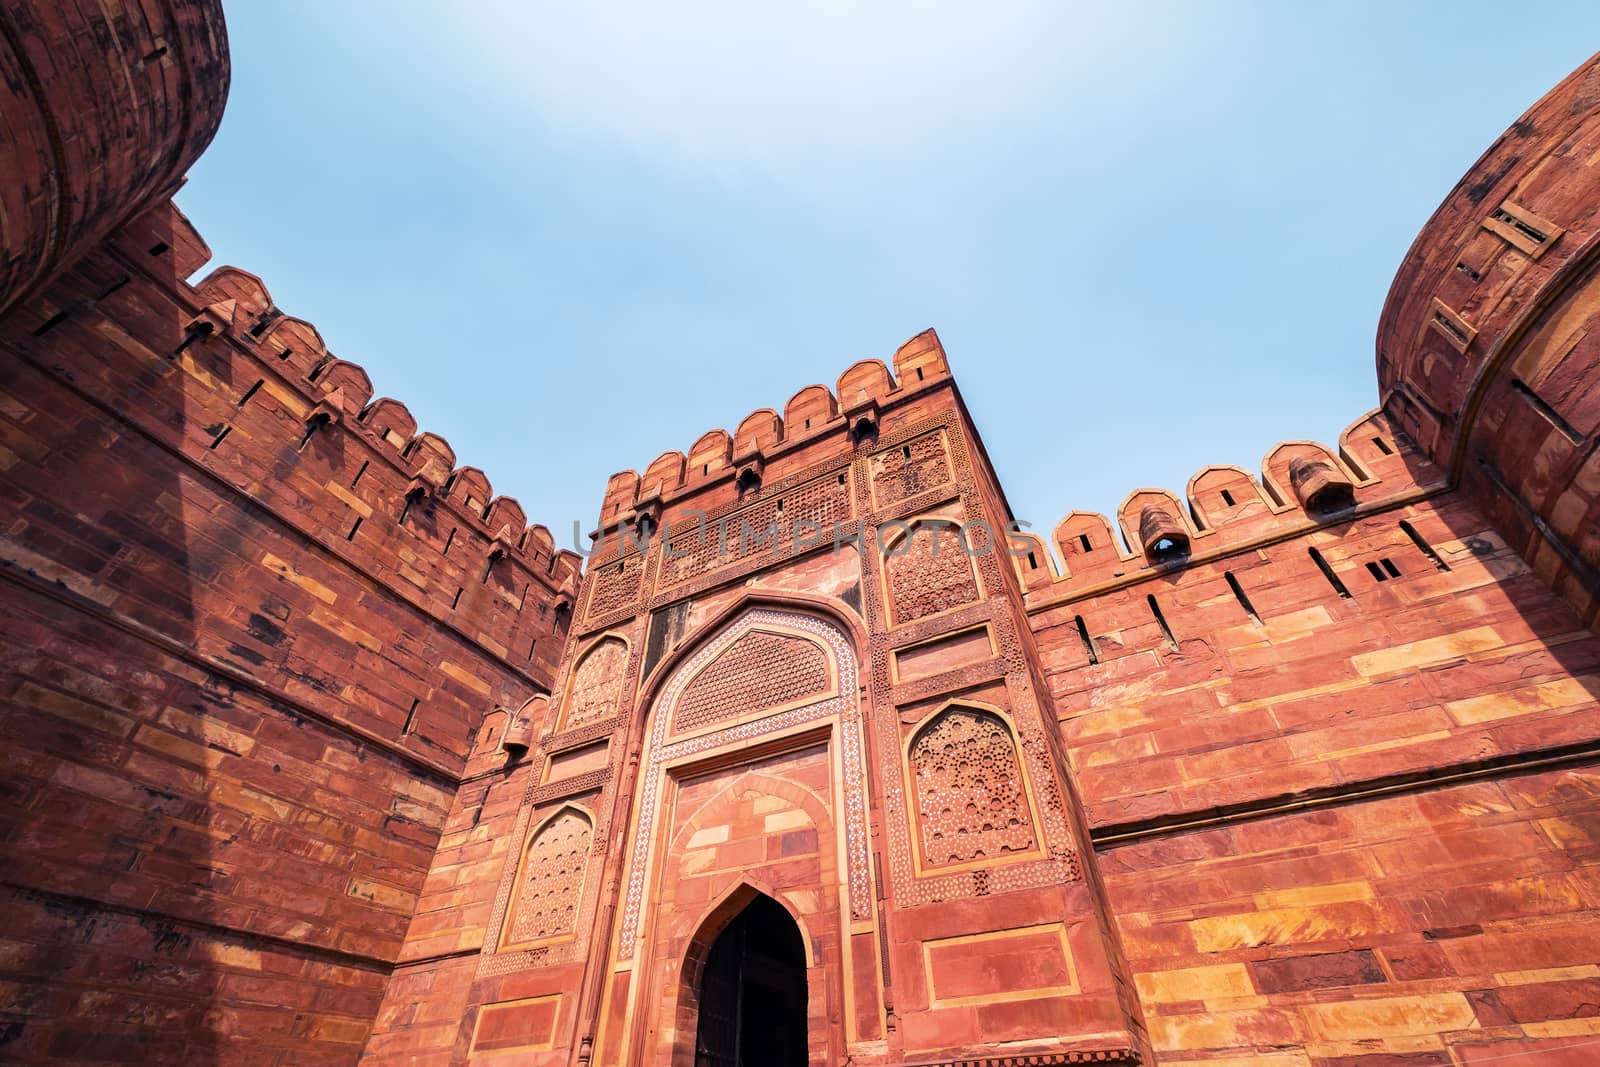 Agra Fort in Agra, Uttar Pradesh, India. UNESCO world heritage. Agra Fort designed and built by the great Mughal ruler Akbar, in about 1565 A.D.